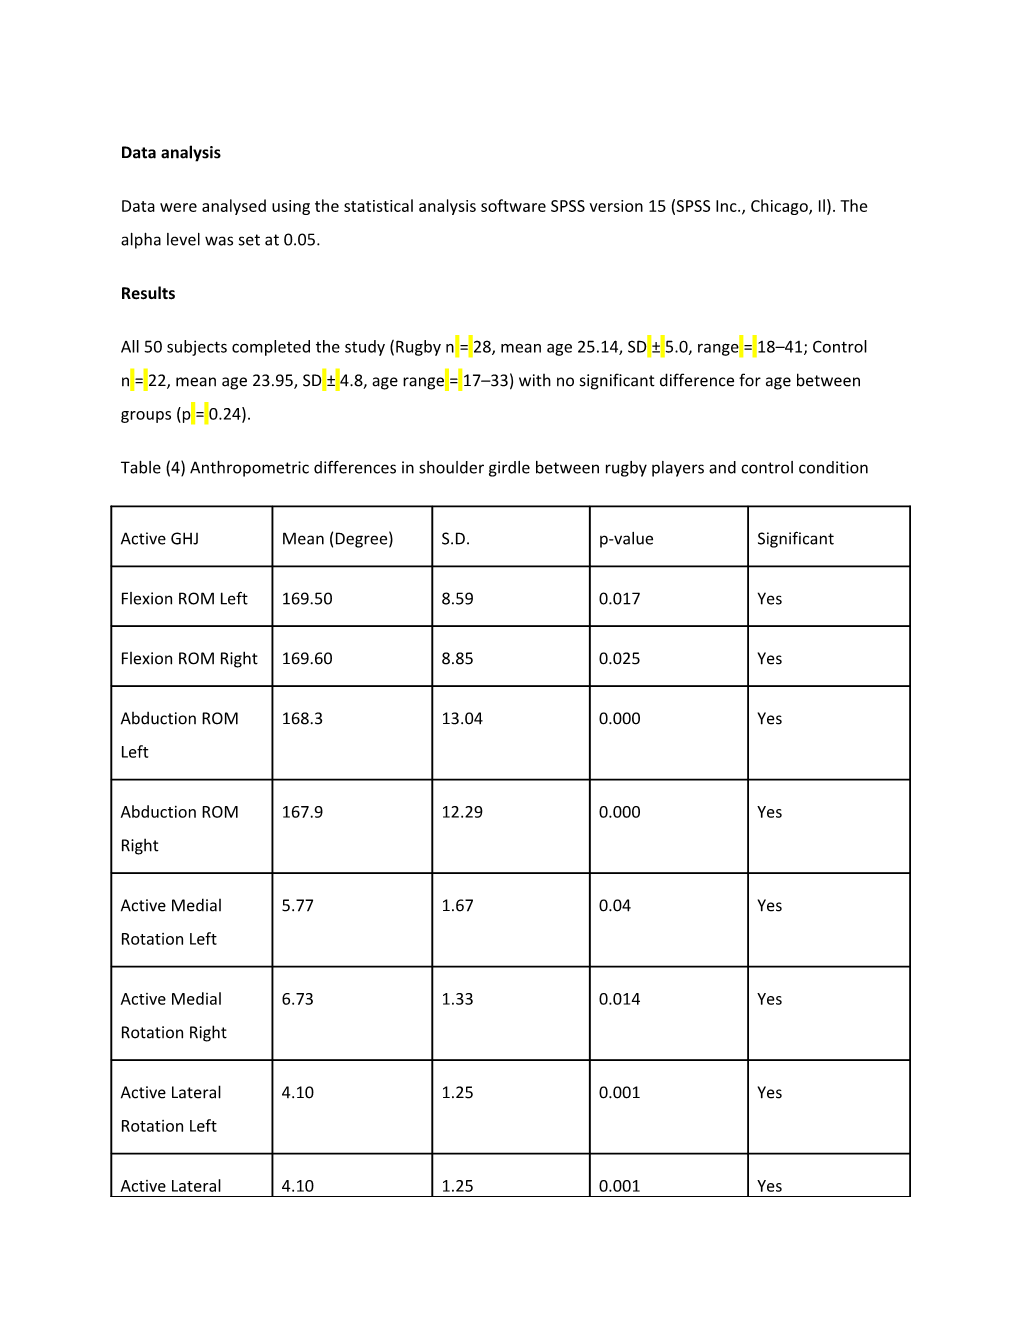 Table (4) Anthropometric Differences in Shoulder Girdle Between Rugby Players and Control